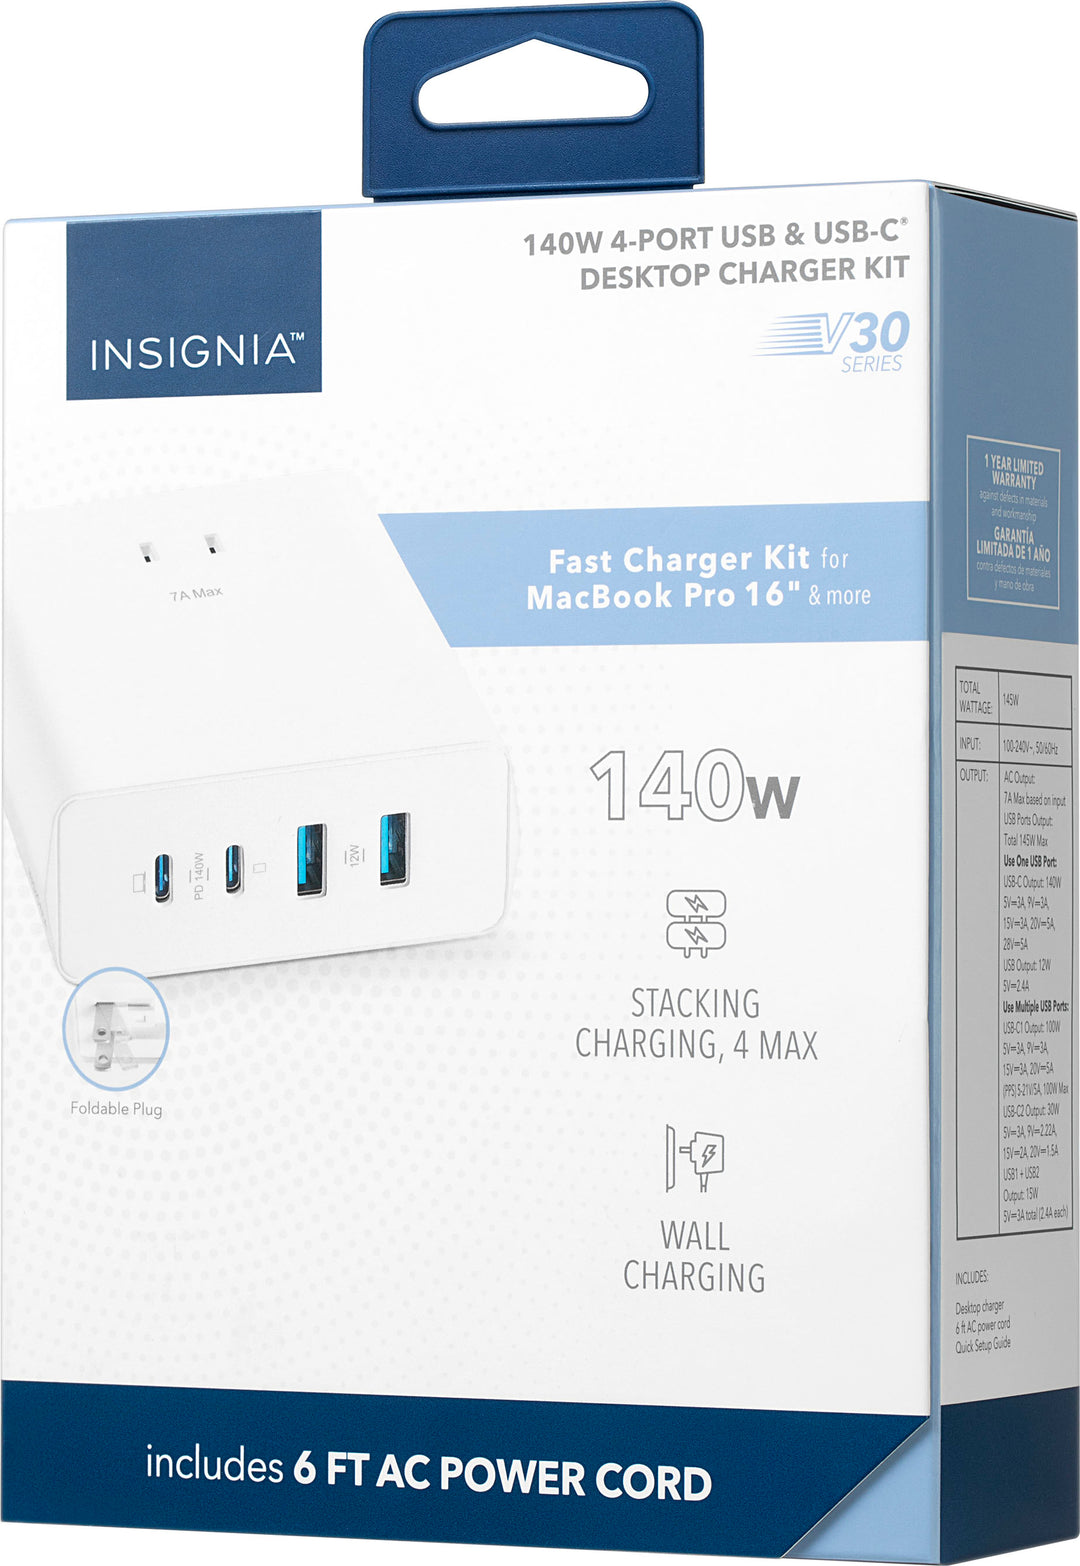 Insignia™ - 140W 4-Port USB and USB-C Desktop Charger Kit for MacBook Pro 16”, Laptops, Smartphone, Tablet, and More - White_8